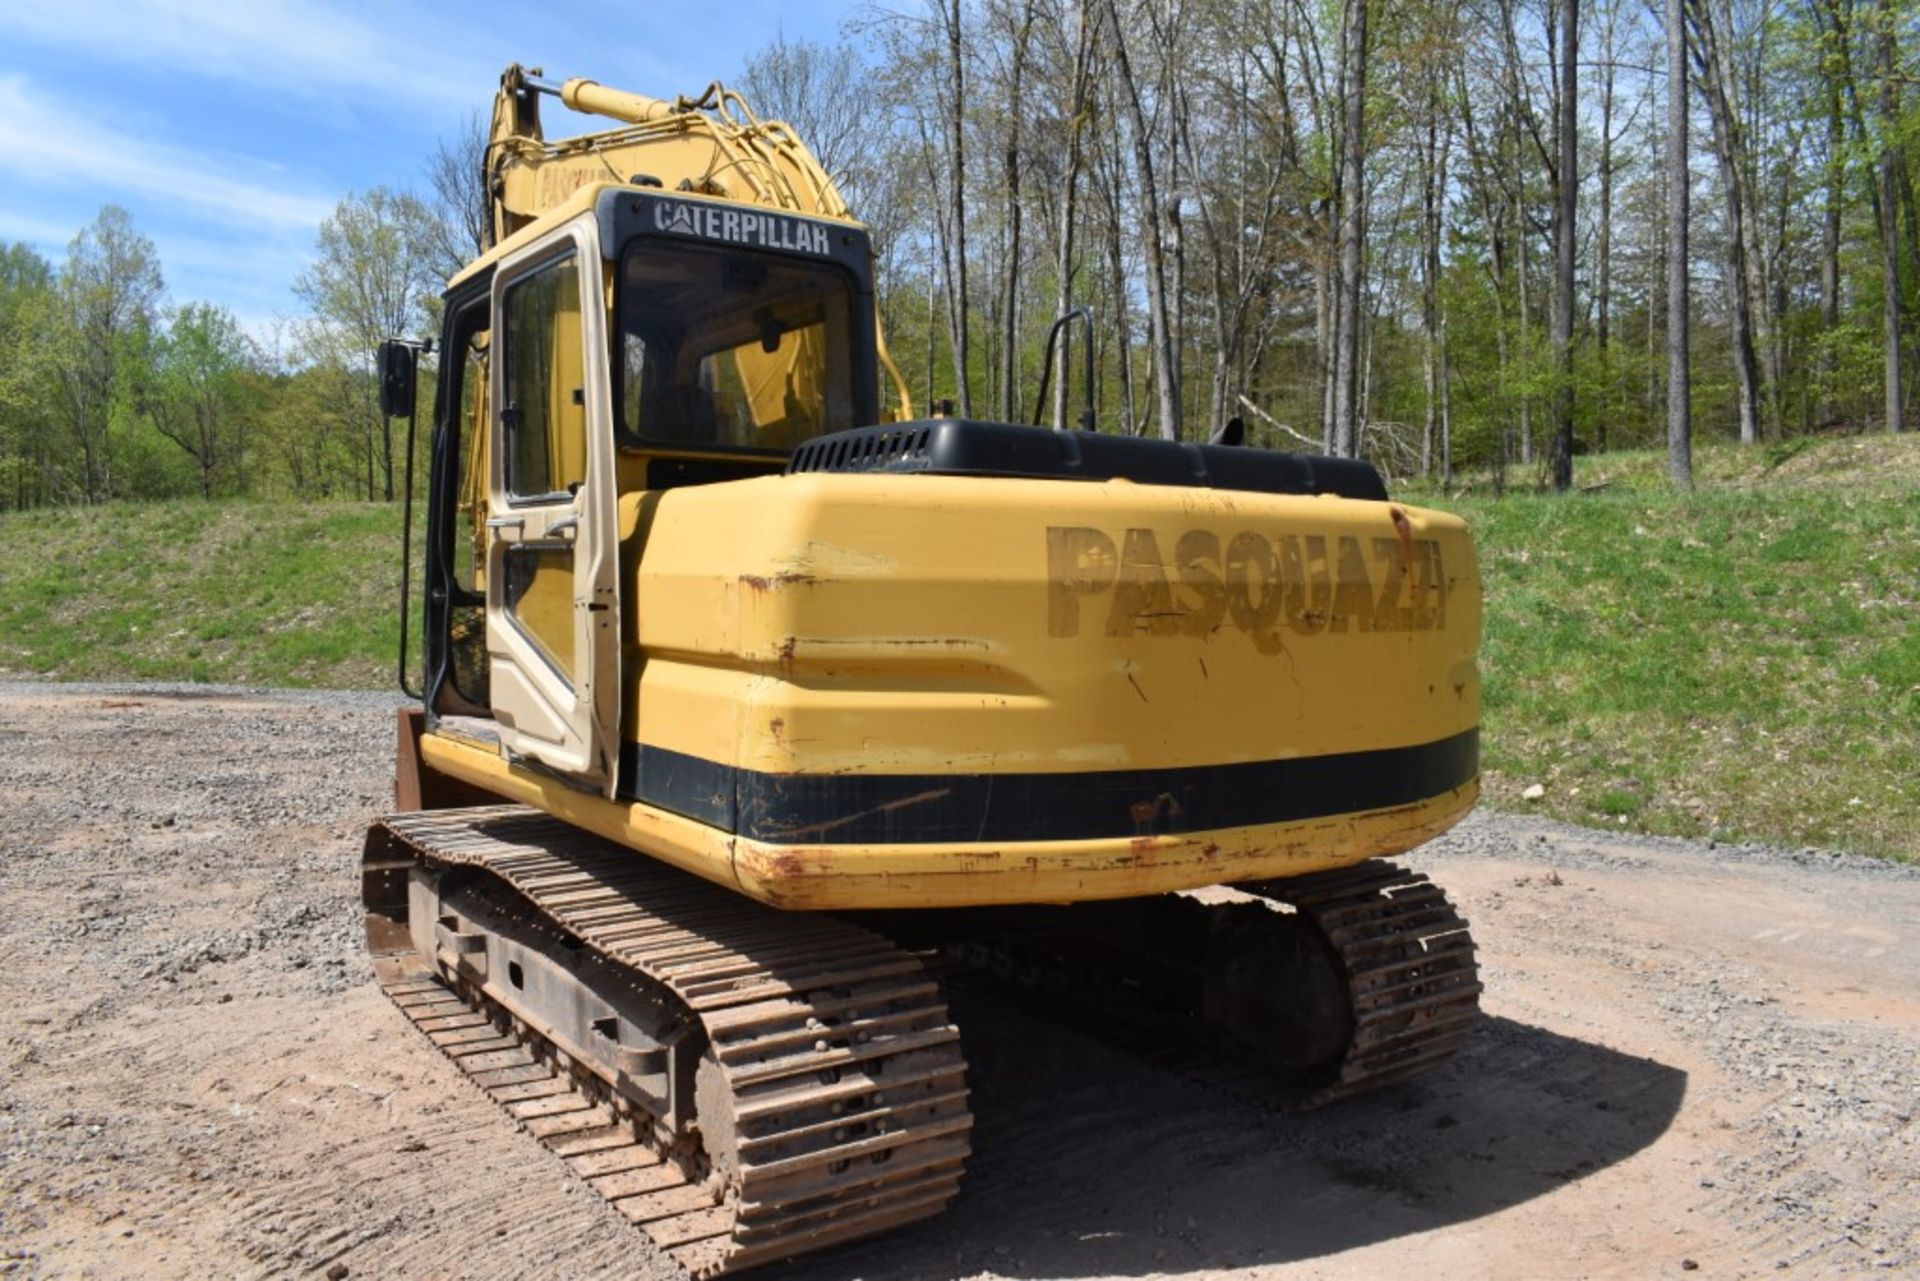 CAT 312B Excavator 11114 Hours, Runs and Operates, 48" Bucket, Auxiliary Hydraulics, Quick Coupler - Image 17 of 40